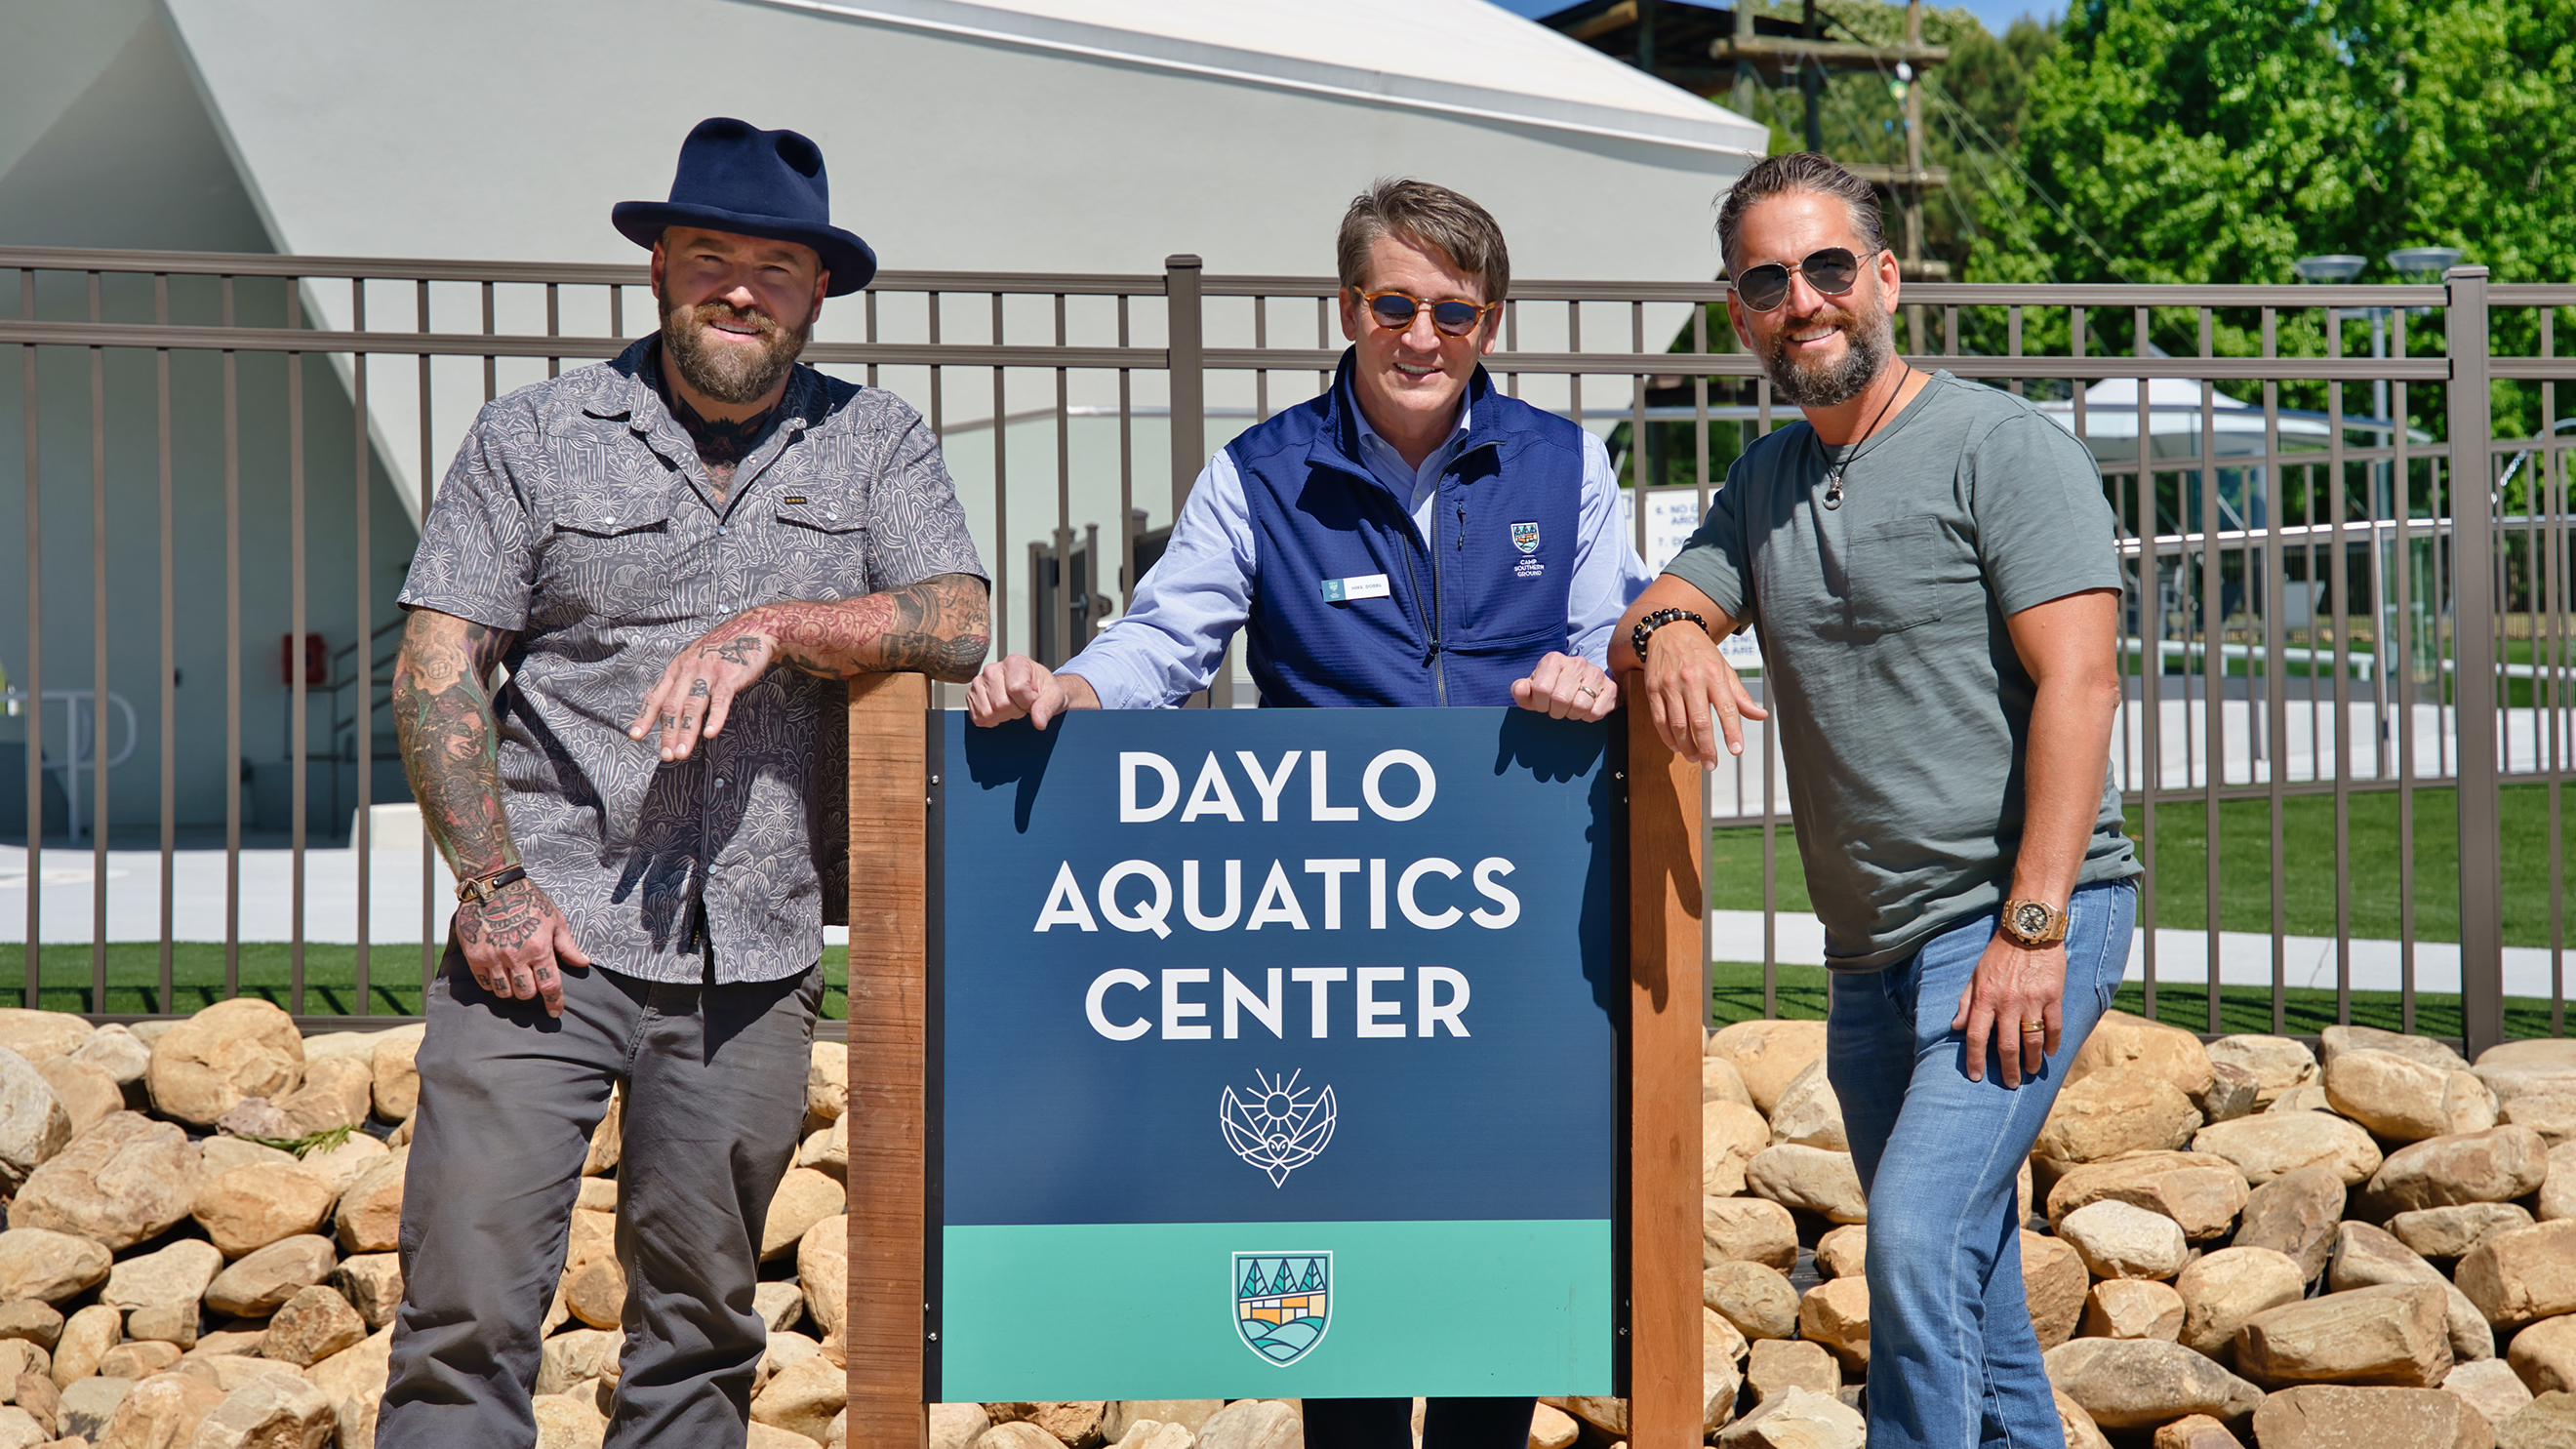 Camp Southern Ground founder Zac Brown and CEO Mike Dobbs stand with Ben Weiss of the DAYLO Foundation